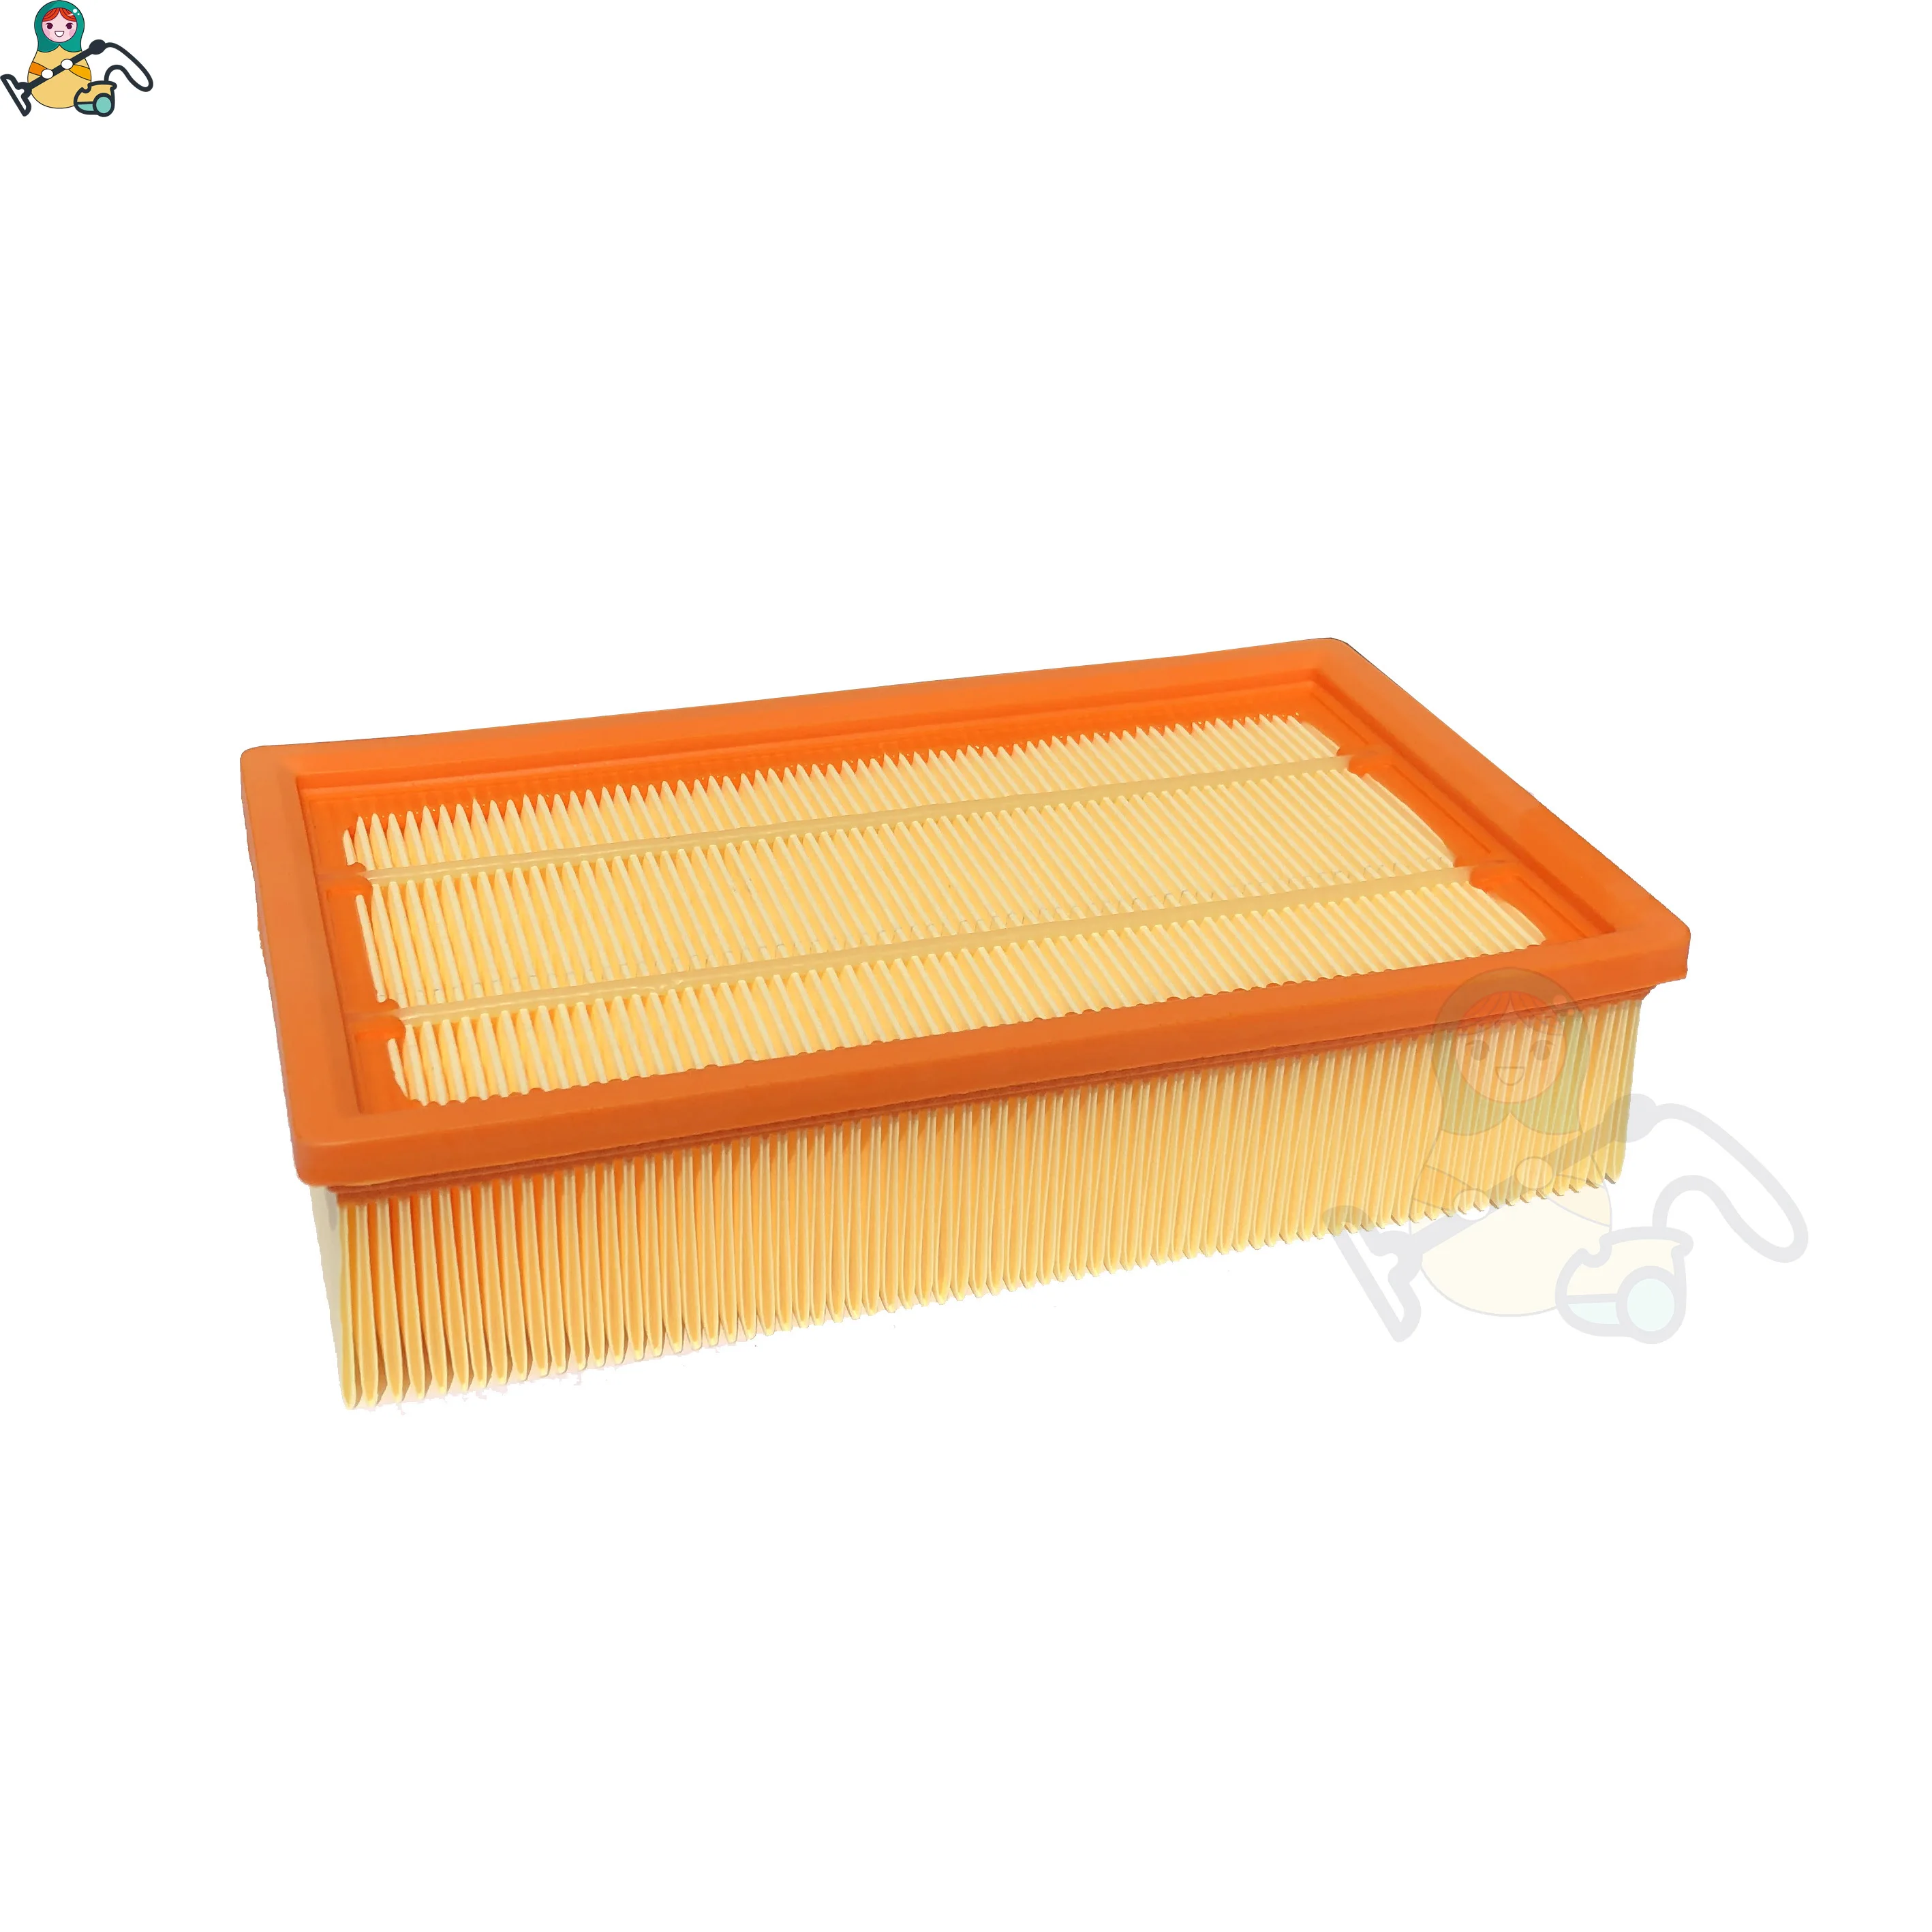 Filter for Karcher vacuum cleaner filter KM 70/30 NT 20/1 NT 30/1 Ap NT 35/1 NT 361 ECO NT 40/1 Ap NT 50/1 NT 561 NT 611 Eco